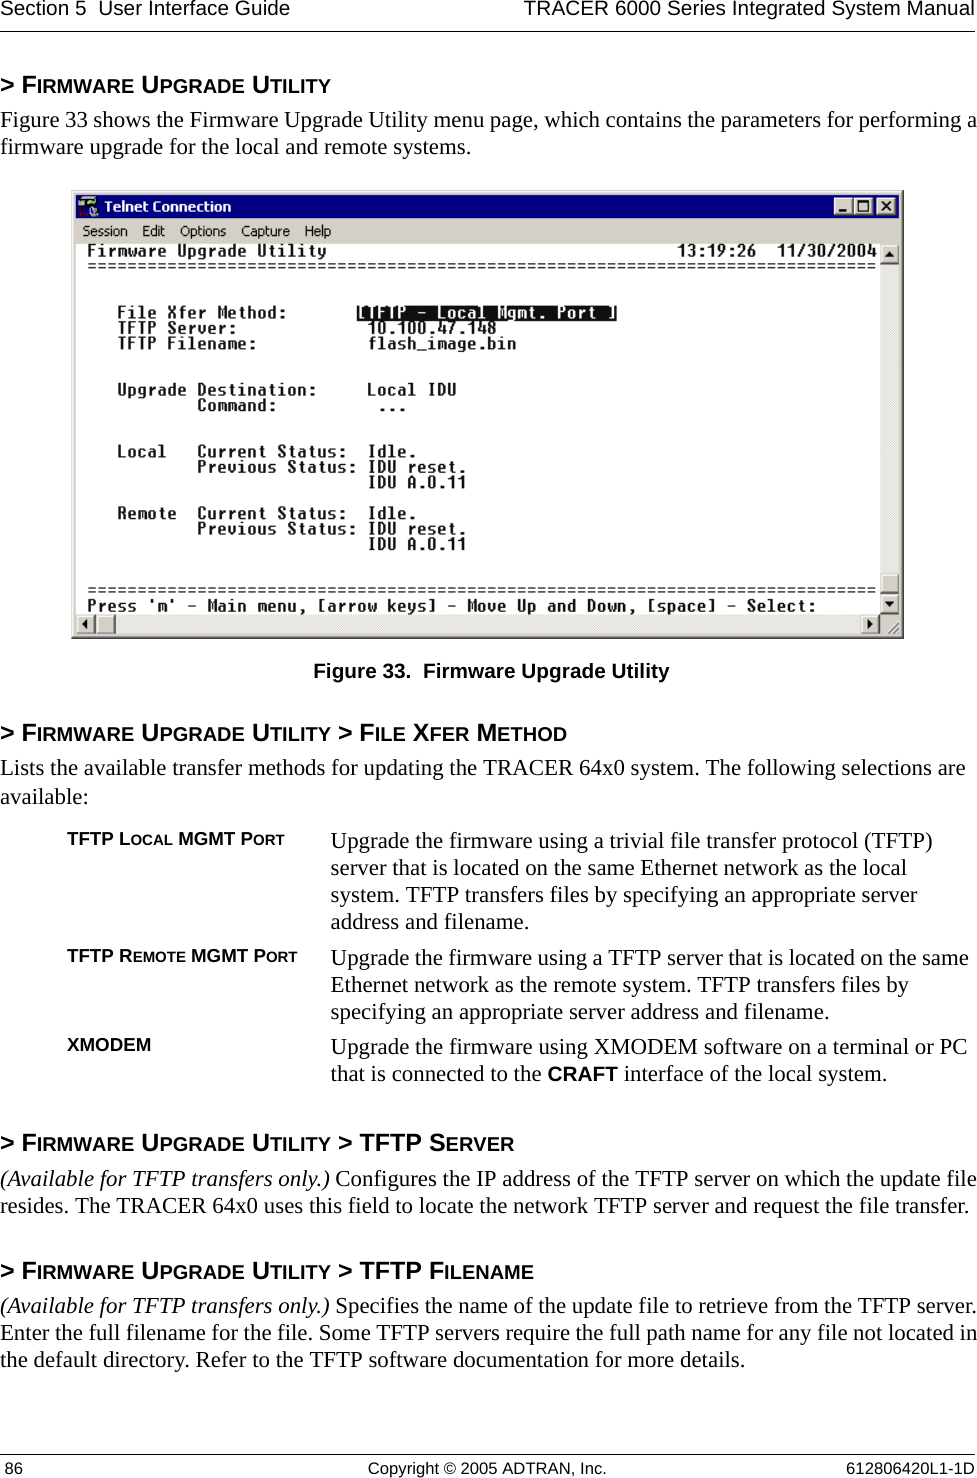 Section 5  User Interface Guide TRACER 6000 Series Integrated System Manual 86 Copyright © 2005 ADTRAN, Inc. 612806420L1-1D&gt; FIRMWARE UPGRADE UTILITYFigure 33 shows the Firmware Upgrade Utility menu page, which contains the parameters for performing a firmware upgrade for the local and remote systems. Figure 33.  Firmware Upgrade Utility&gt; FIRMWARE UPGRADE UTILITY &gt; FILE XFER METHODLists the available transfer methods for updating the TRACER 64x0 system. The following selections are available:&gt; FIRMWARE UPGRADE UTILITY &gt; TFTP SERVER(Available for TFTP transfers only.) Configures the IP address of the TFTP server on which the update file resides. The TRACER 64x0 uses this field to locate the network TFTP server and request the file transfer.&gt; FIRMWARE UPGRADE UTILITY &gt; TFTP FILENAME(Available for TFTP transfers only.) Specifies the name of the update file to retrieve from the TFTP server. Enter the full filename for the file. Some TFTP servers require the full path name for any file not located in the default directory. Refer to the TFTP software documentation for more details.TFTP LOCAL MGMT PORT Upgrade the firmware using a trivial file transfer protocol (TFTP) server that is located on the same Ethernet network as the local system. TFTP transfers files by specifying an appropriate server address and filename.TFTP REMOTE MGMT PORT Upgrade the firmware using a TFTP server that is located on the same Ethernet network as the remote system. TFTP transfers files by specifying an appropriate server address and filename.XMODEM Upgrade the firmware using XMODEM software on a terminal or PC that is connected to the CRAFT interface of the local system. 